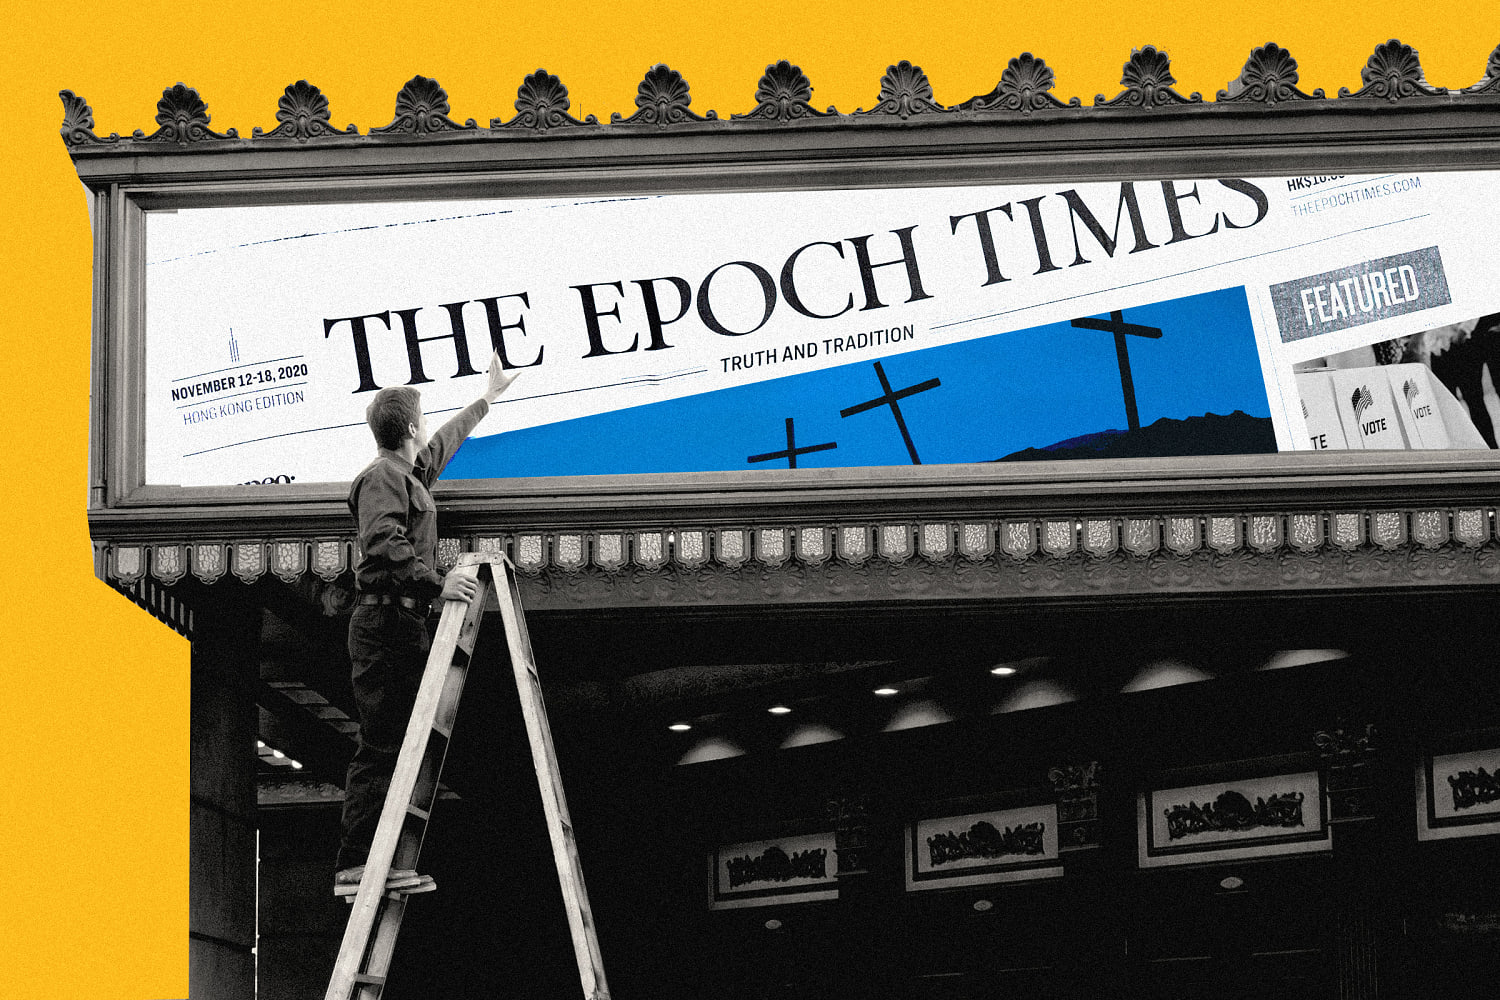 Epoch Times, the conspiratorial pro-Trump outlet, enters a new market: faith-based movies